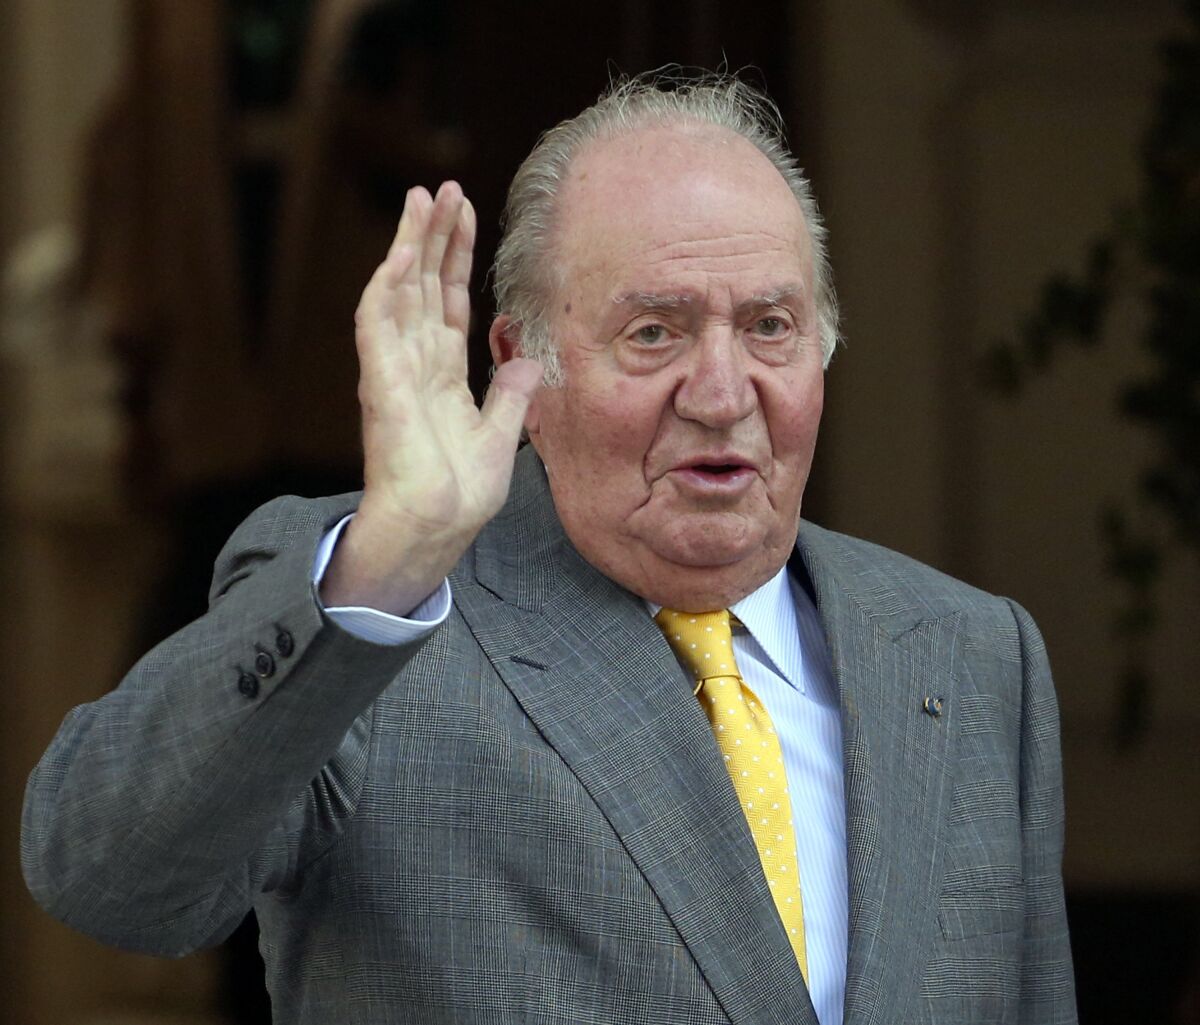 FILE - Spain's former King Juan Carlos waves upon his arrival to the Academia Diplomatica de Chile, in Santiago. Spain's Royal House said on Monday March 7, 2022 that King Felipe VI is accepting his father's desire to return to Spain for periodical visits, although former king Juan Carlos I will remain based in the United Arab Emirates where he moved in 2020 following probes into his financial dealings. The prosecutors didn't find evidence to take the former monarch to court because much of the financial misbehavior, involving millions of euros (dollars) in undeclared accounts, happened when Juan Carlos was protected by immunity as king of Spain and other possible fraud fell out of the statute of limitations. (AP Photo/Esteban Felix, File)